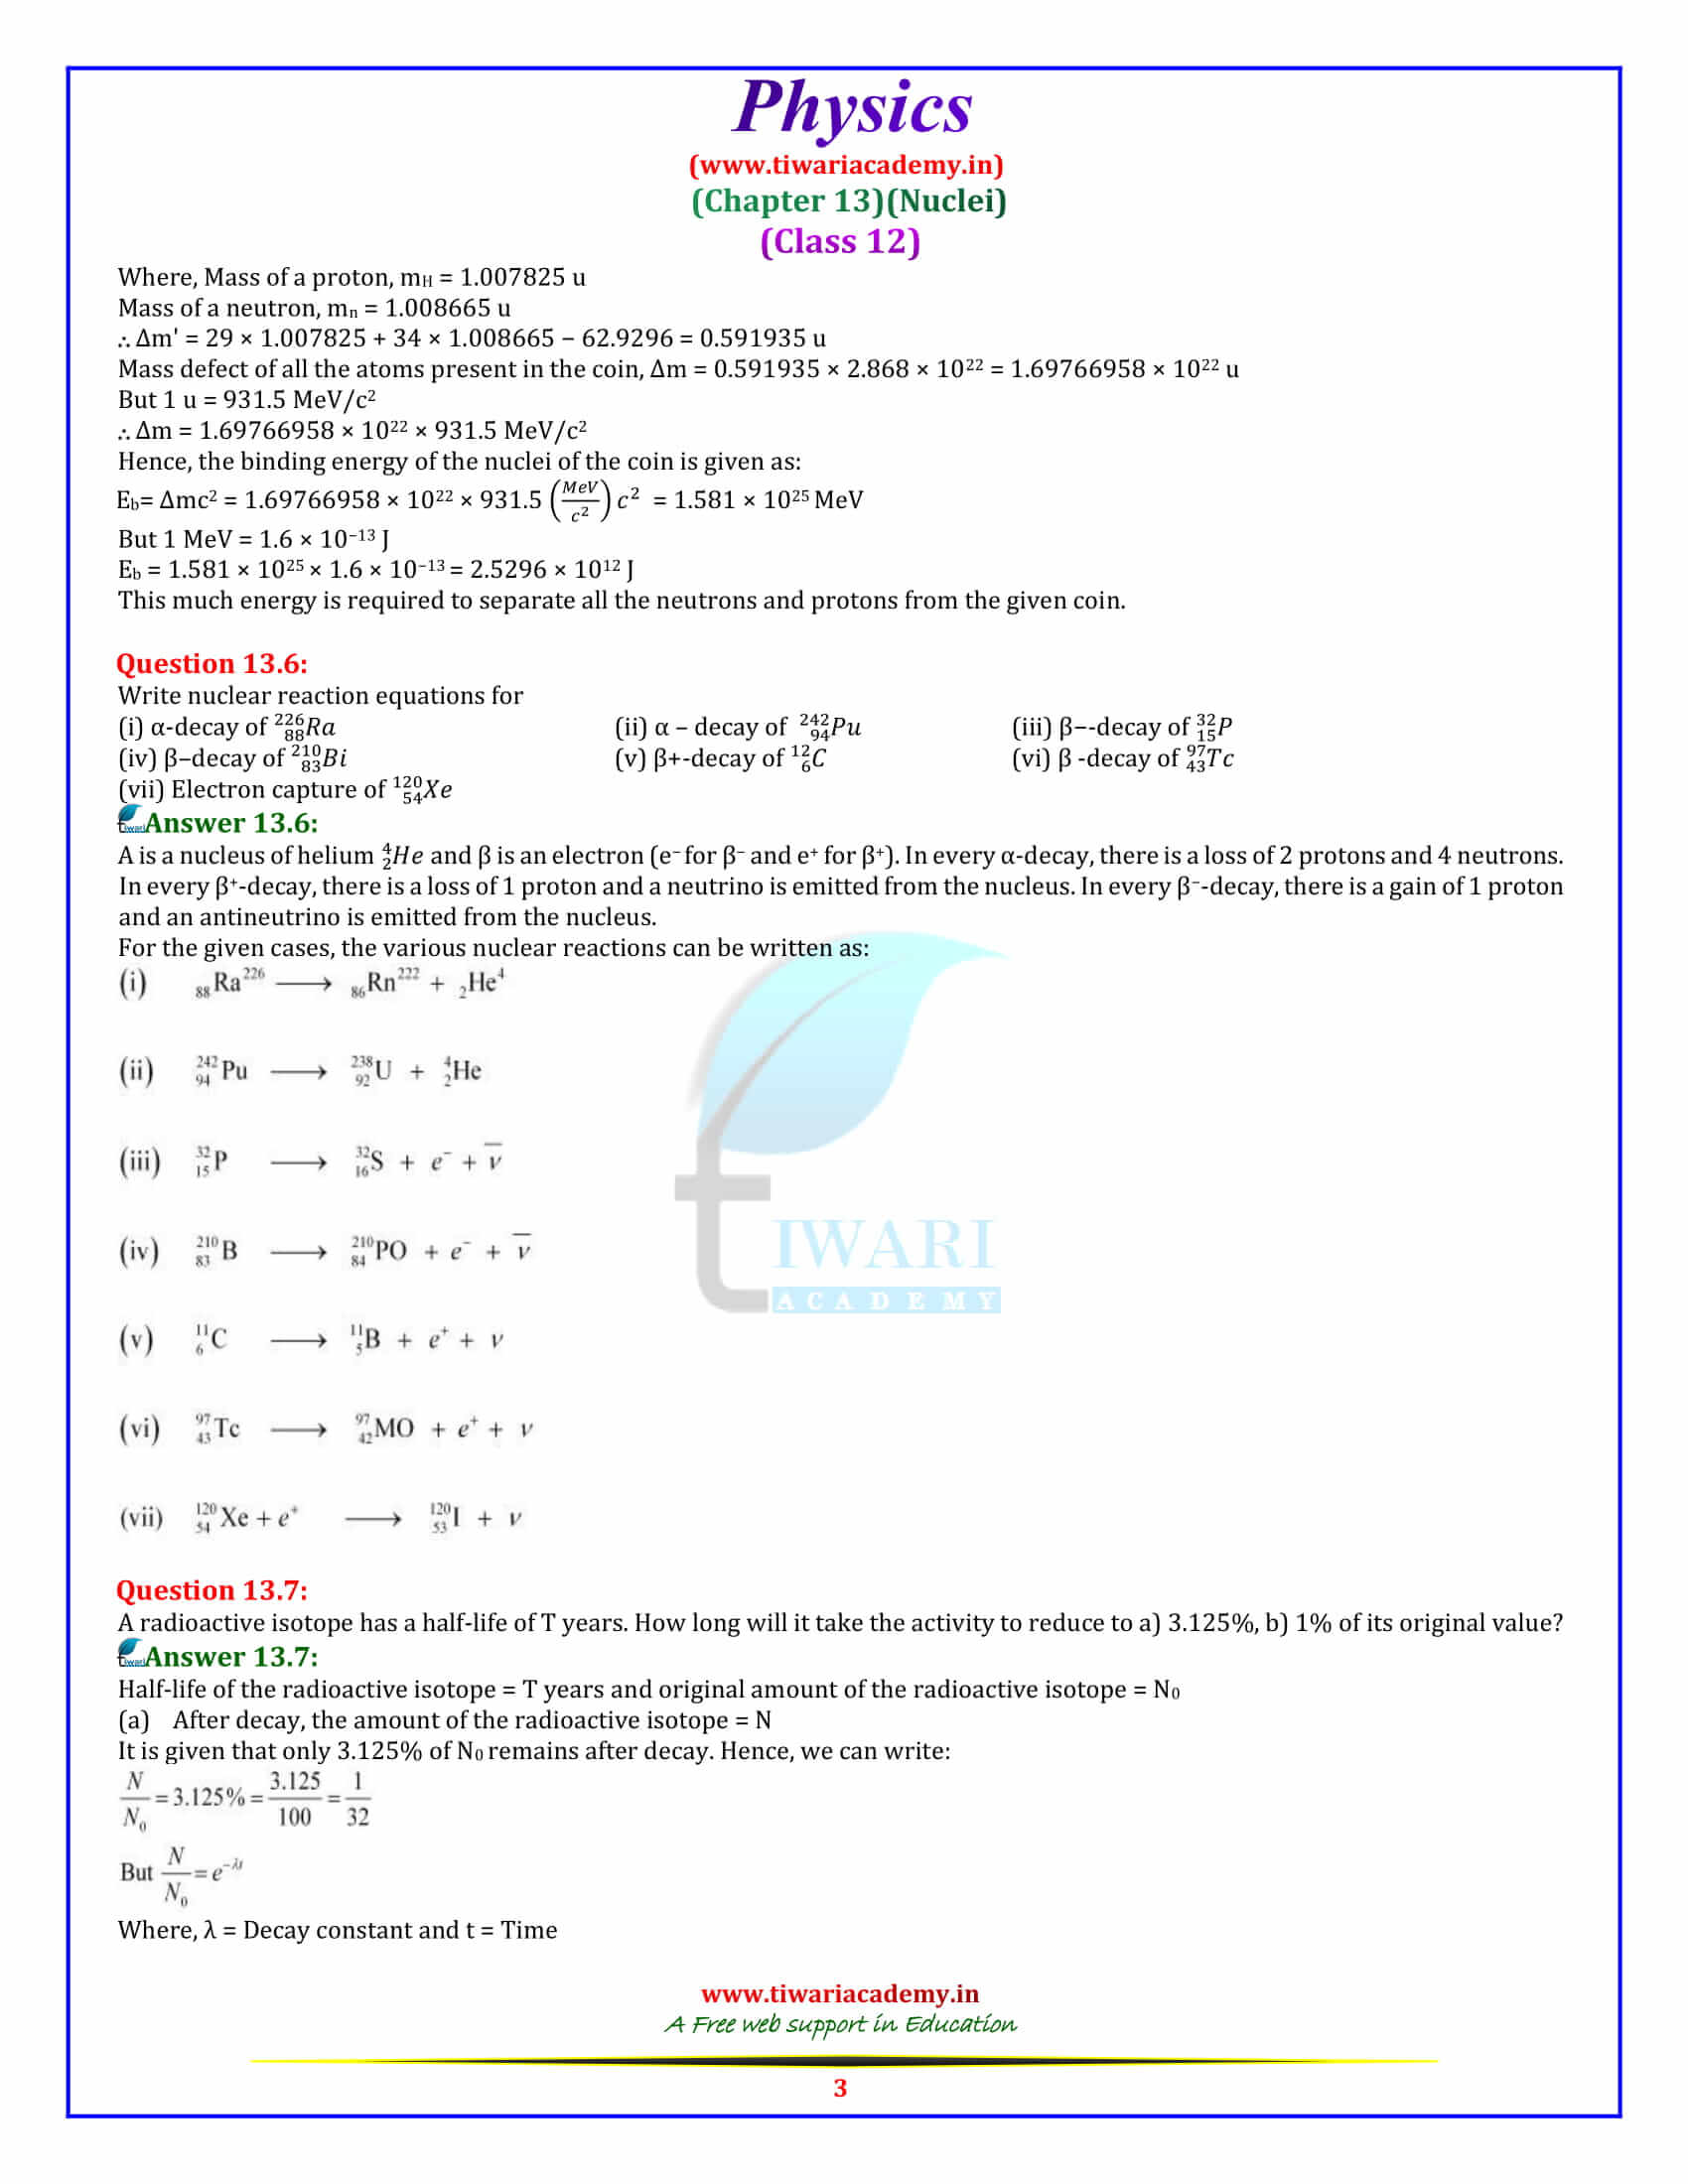 NCERT Solutions for Class 12 Physics Chapter 13 Nuclei in pdf form